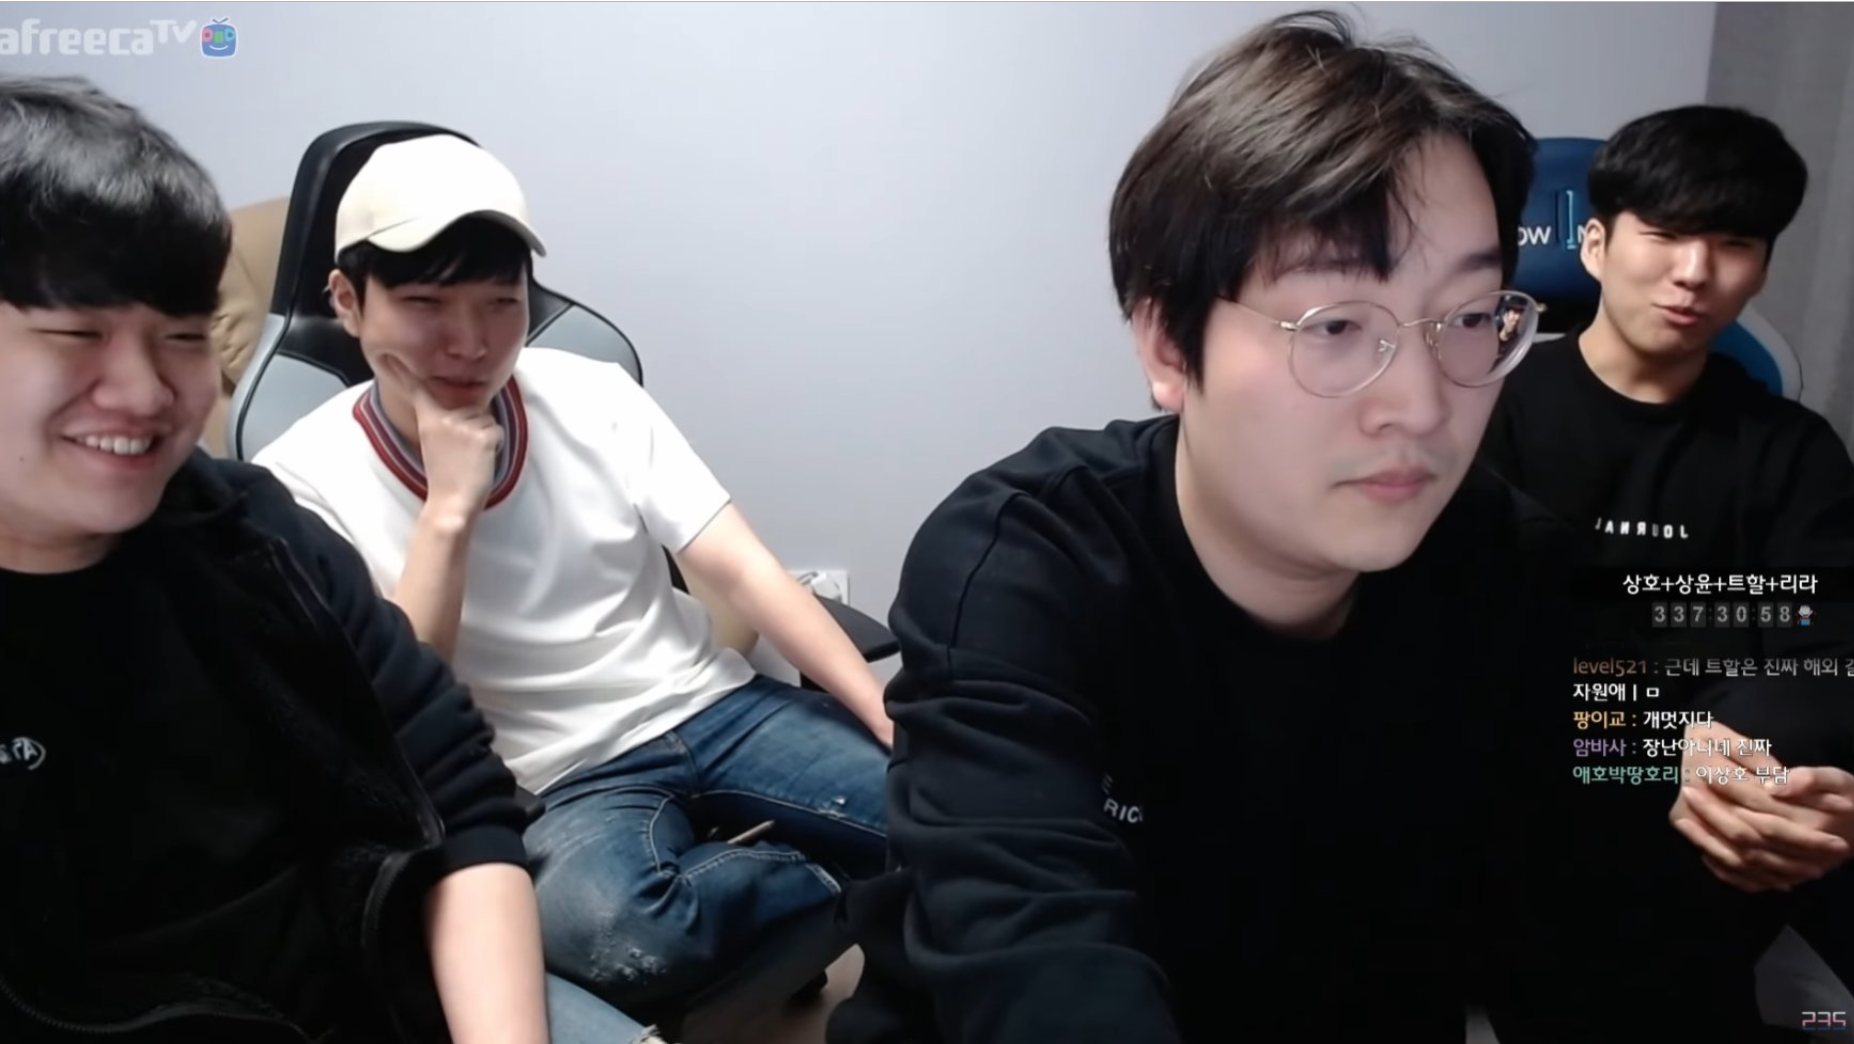 Seorabeol Gaming players